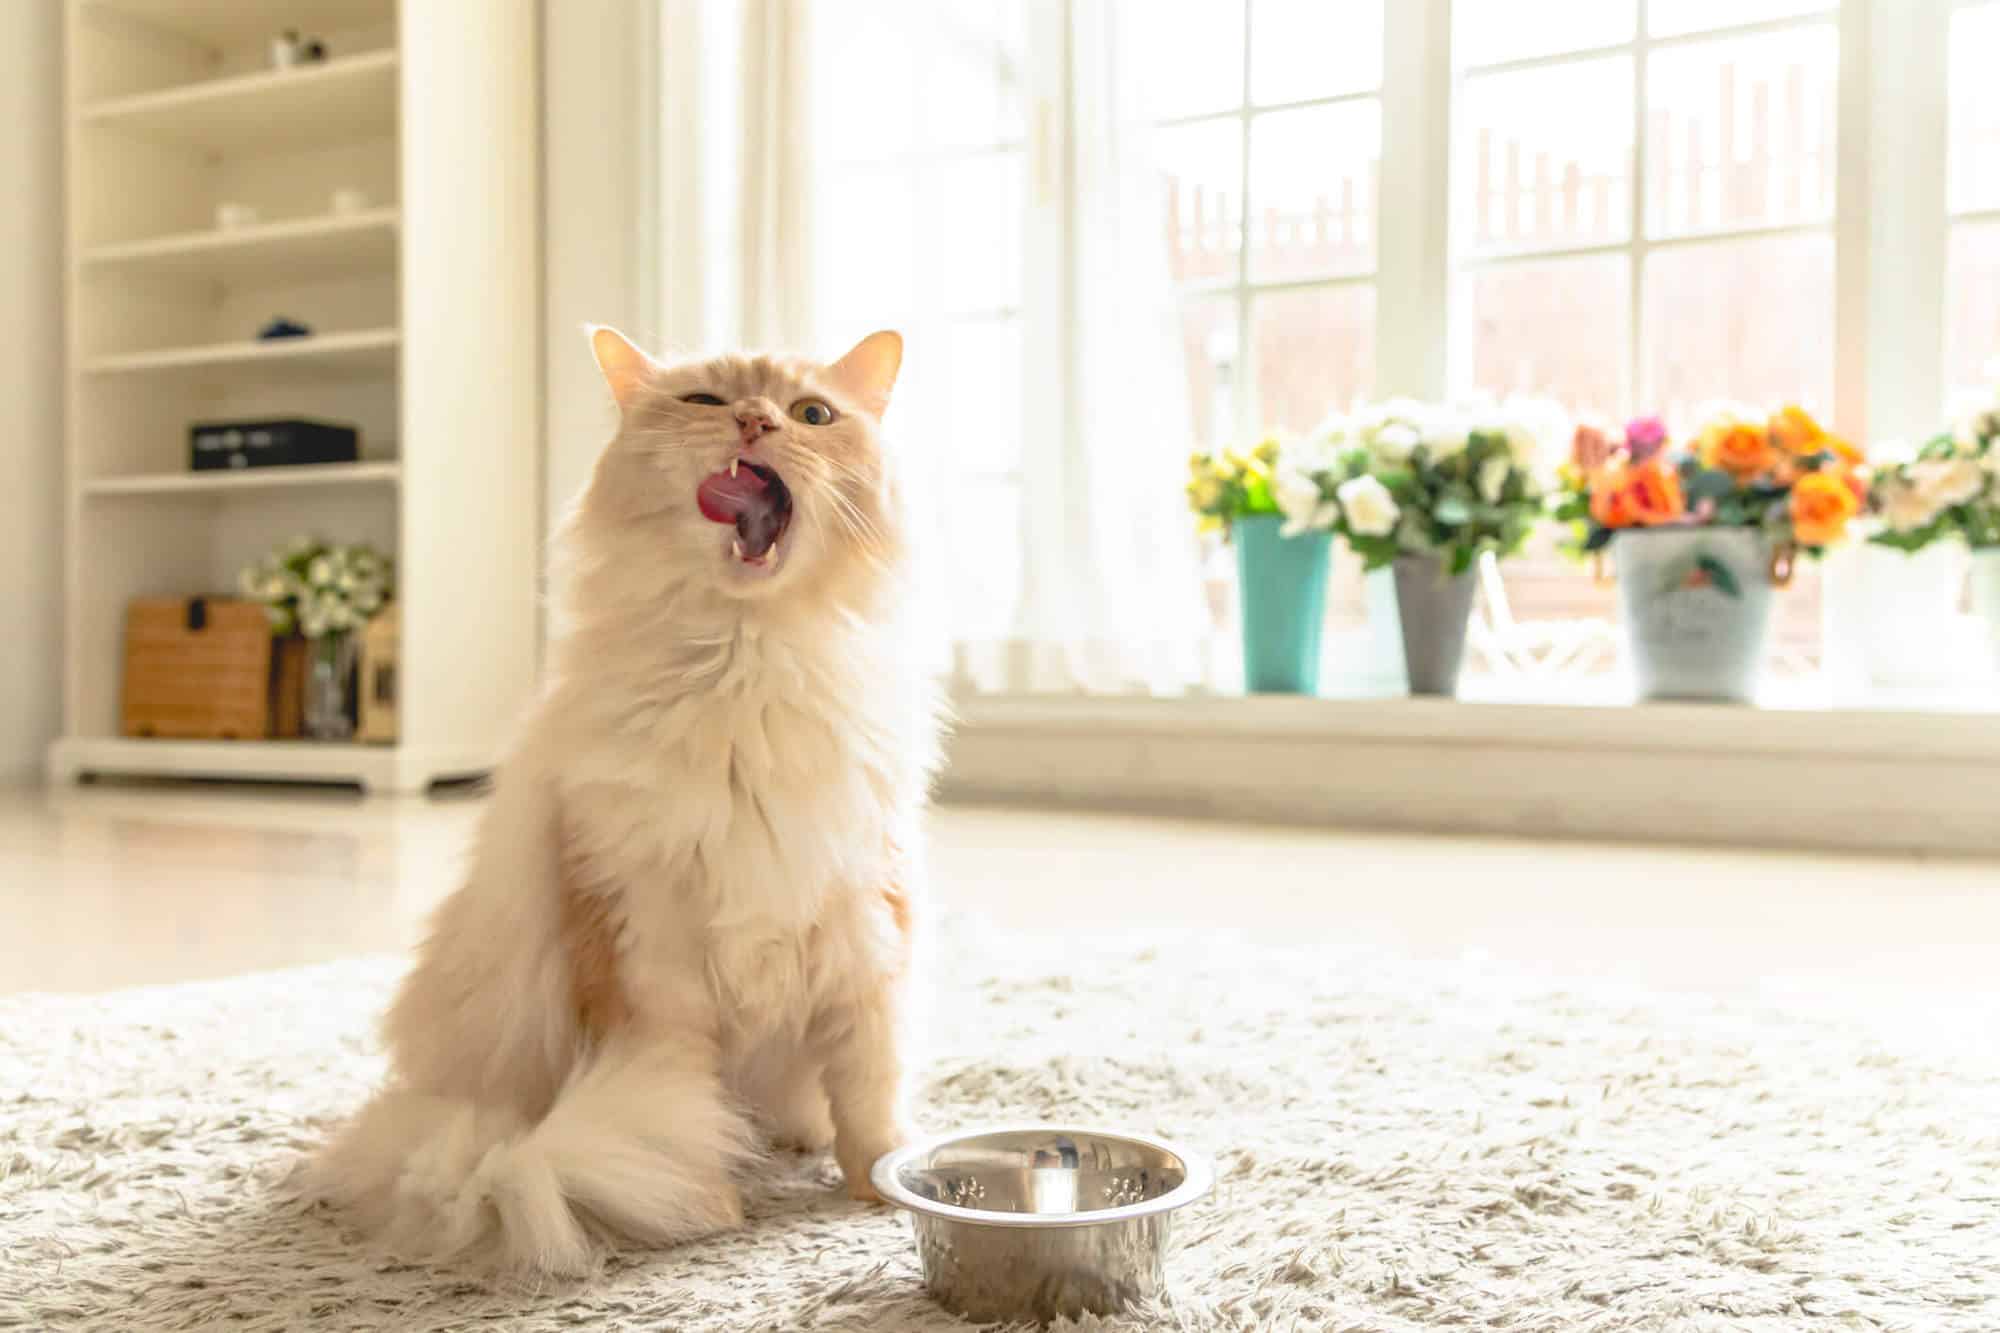 Light fluffy cat with a food bowl licking its face